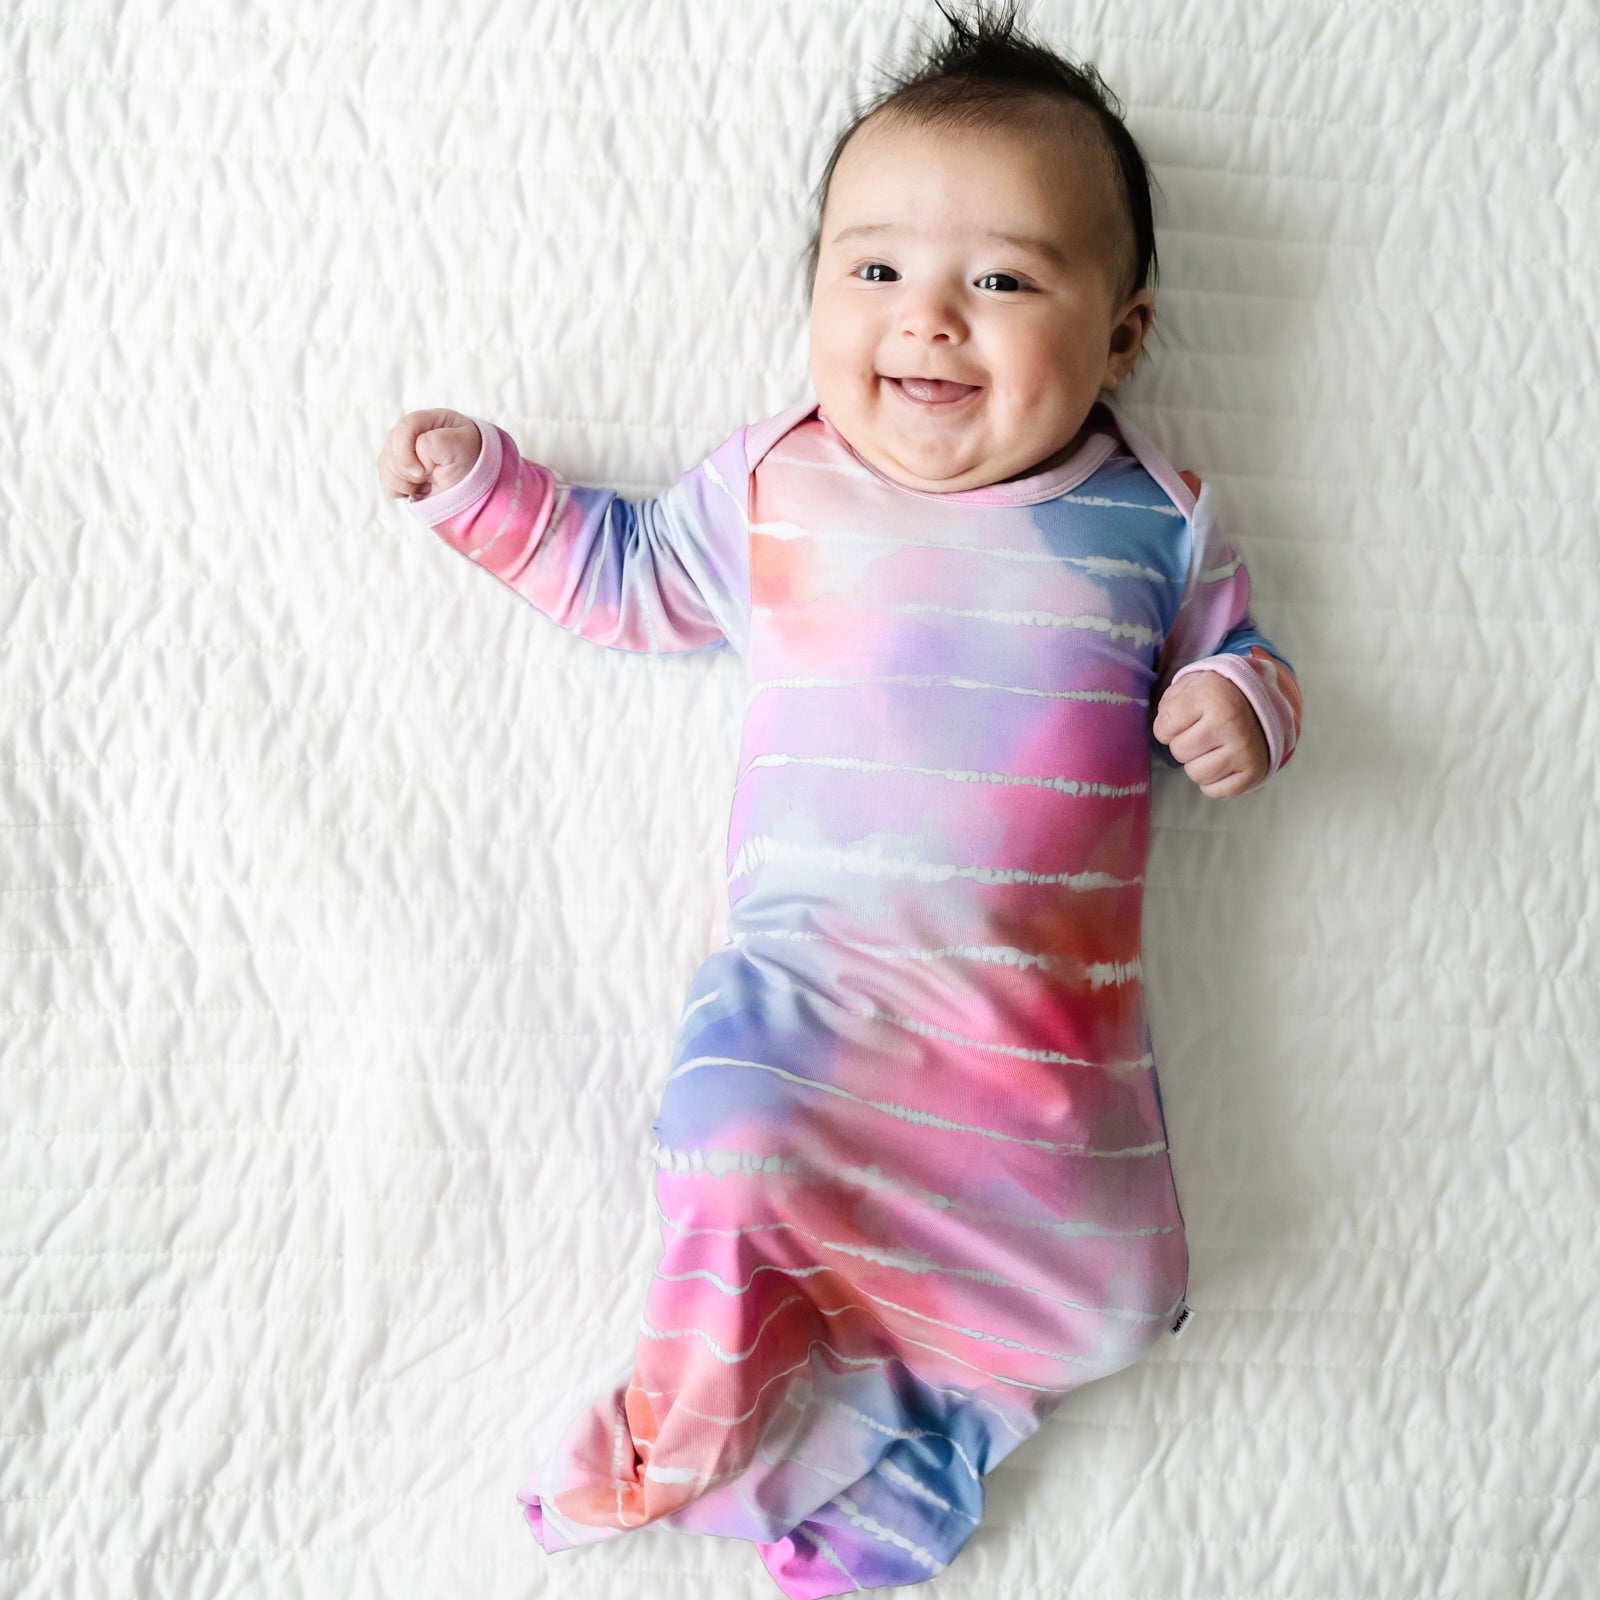 Infant laying on a blanket wearing a Pastel Tie Dye Dreams infant gown